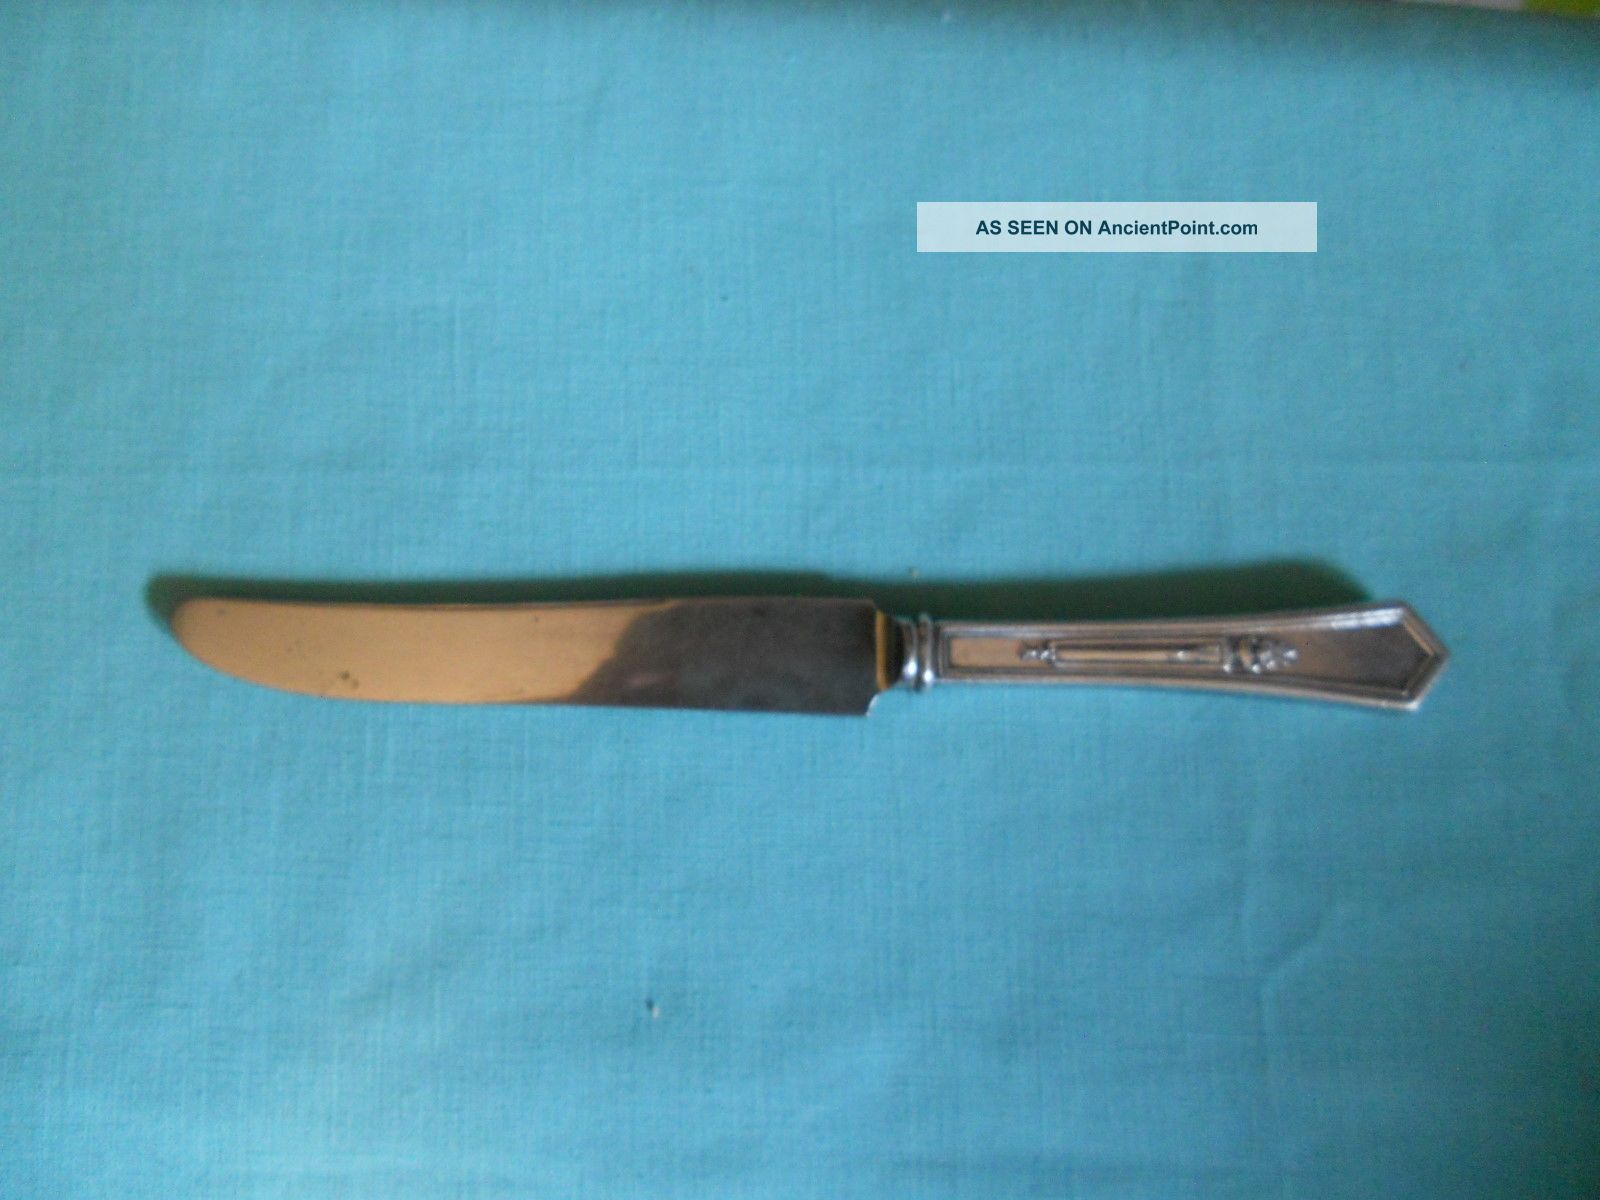 Vintage Rogers Silverplate Dinner Knife Hh Long French Blade La Touraine 1920 Flatware & Silverware photo